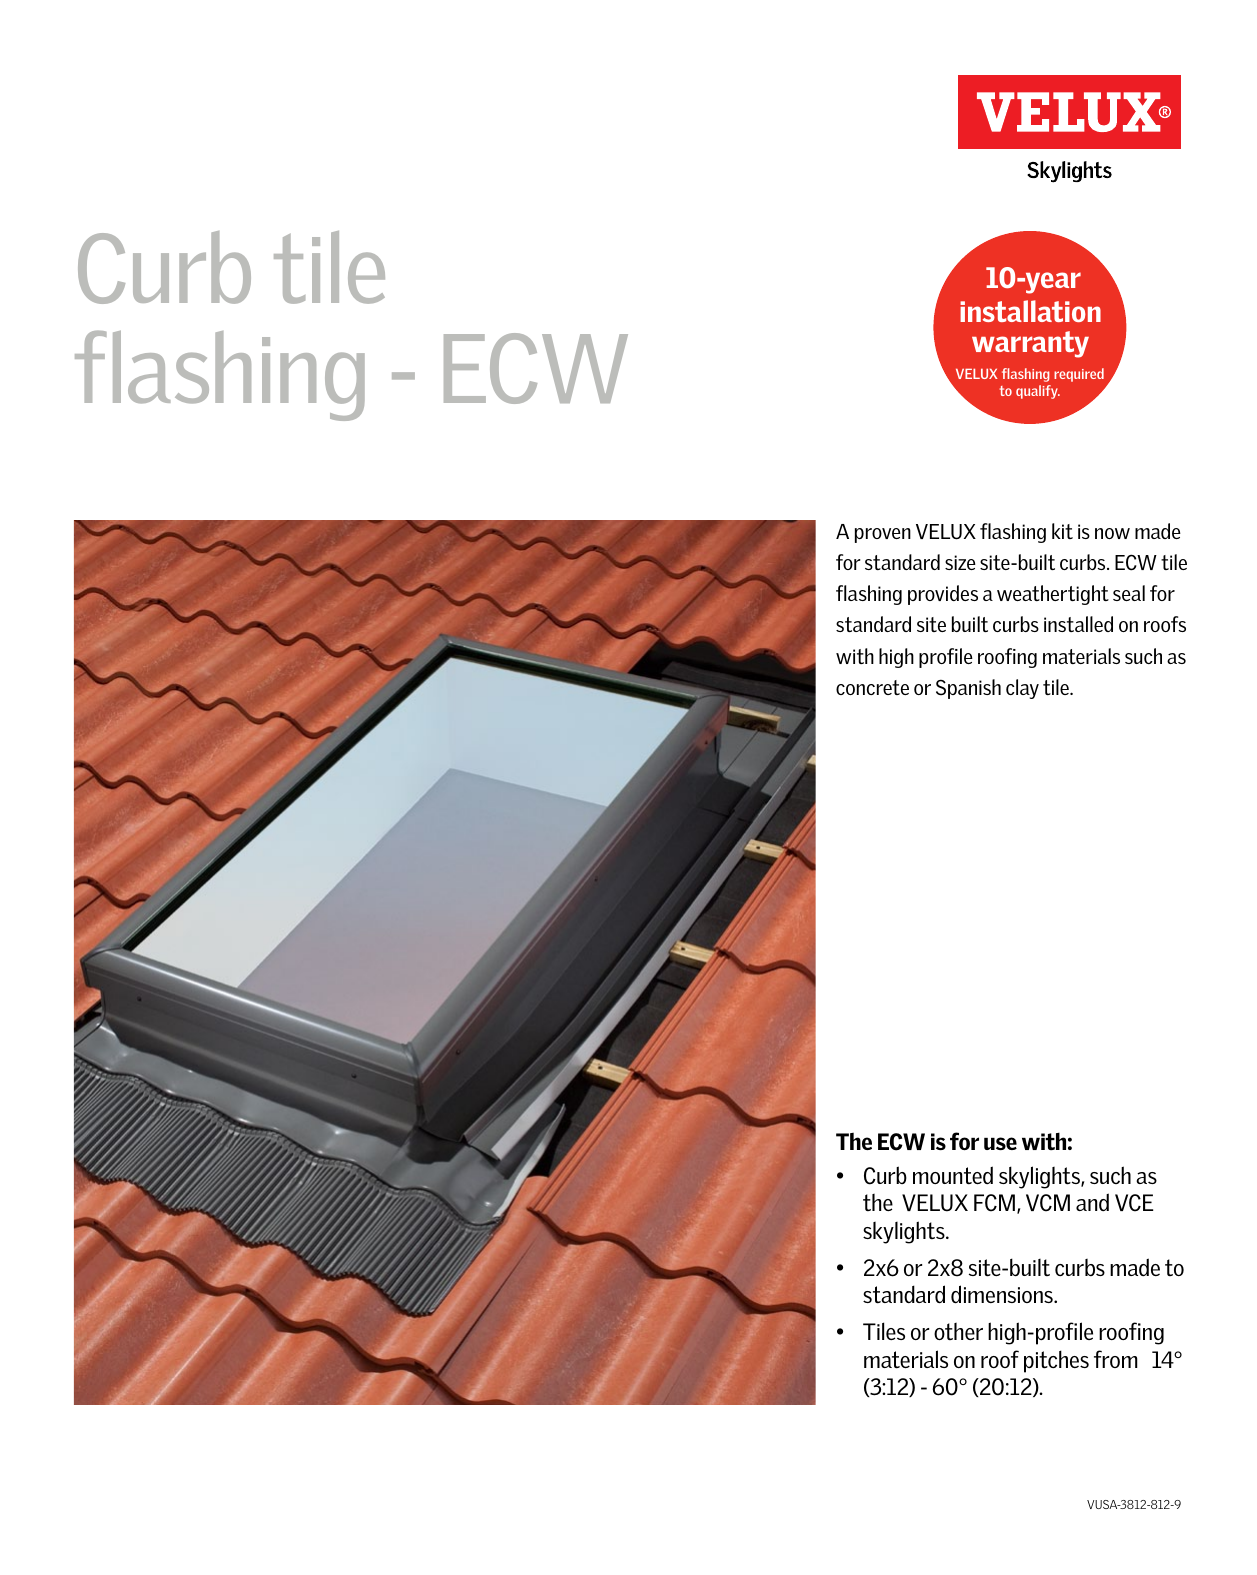 Velux Ecw 3046 0000c 3030 3046 High Profile Tile Roof Flashing With Adhesive Underlayment For Curb Mount Skylight Product Brochure Manualzz